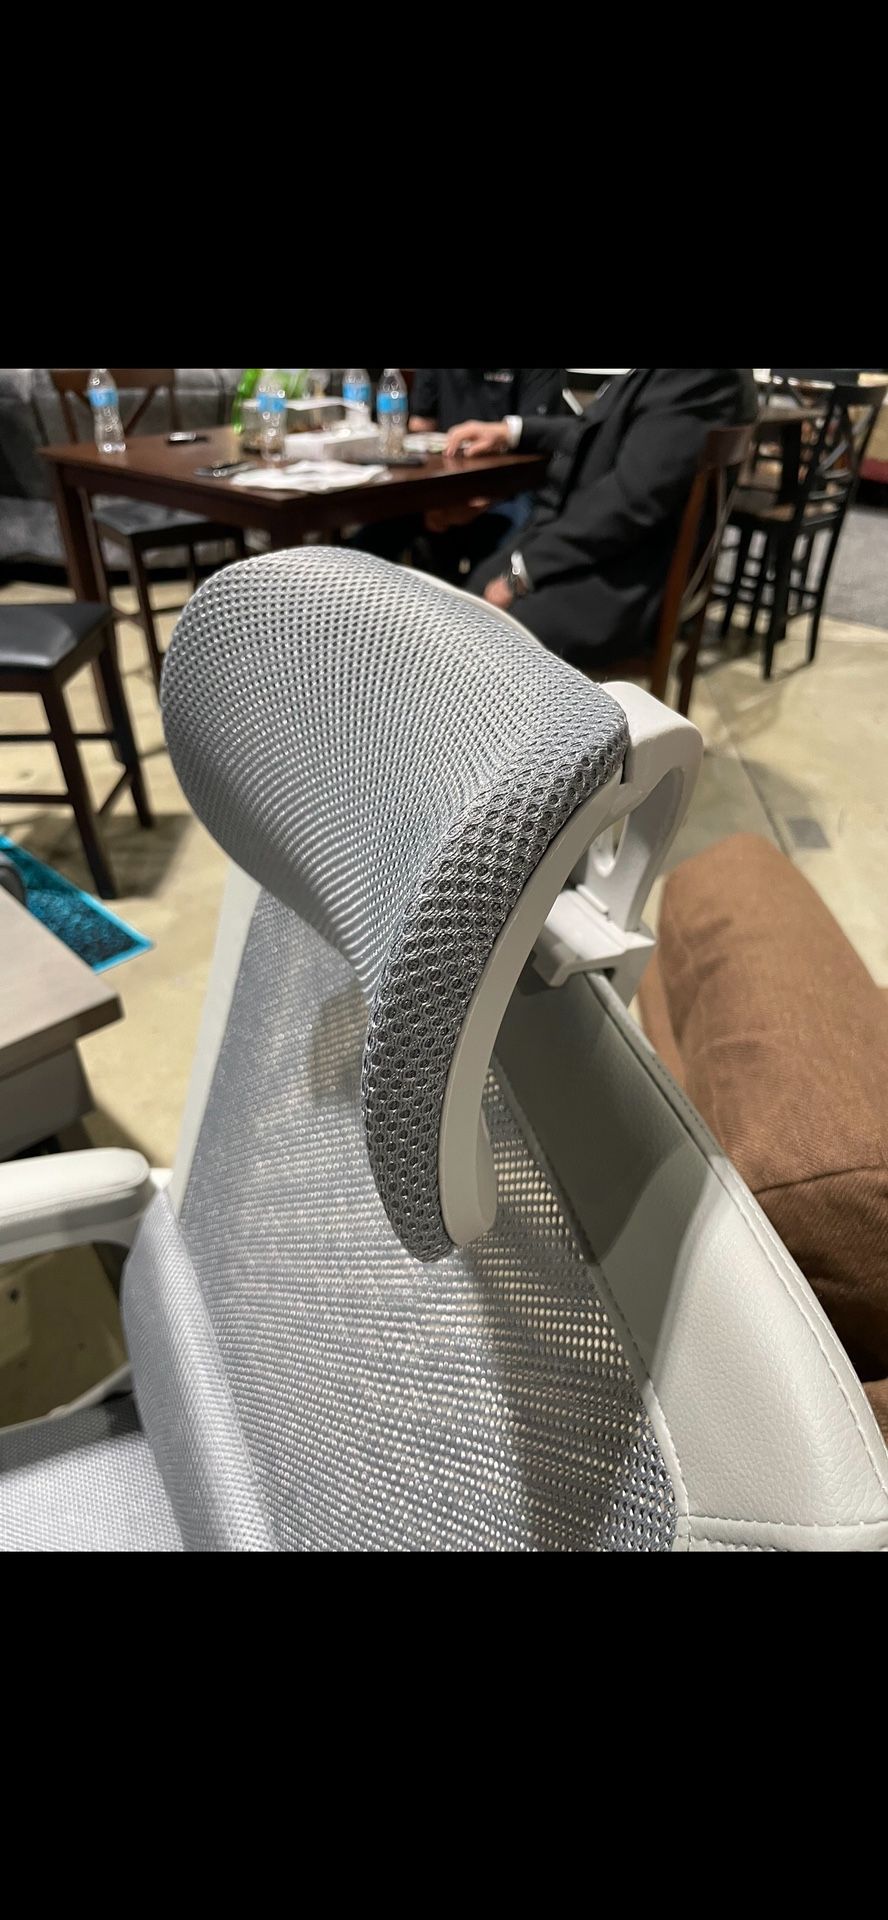 Upscale Orthopedic Office Chair